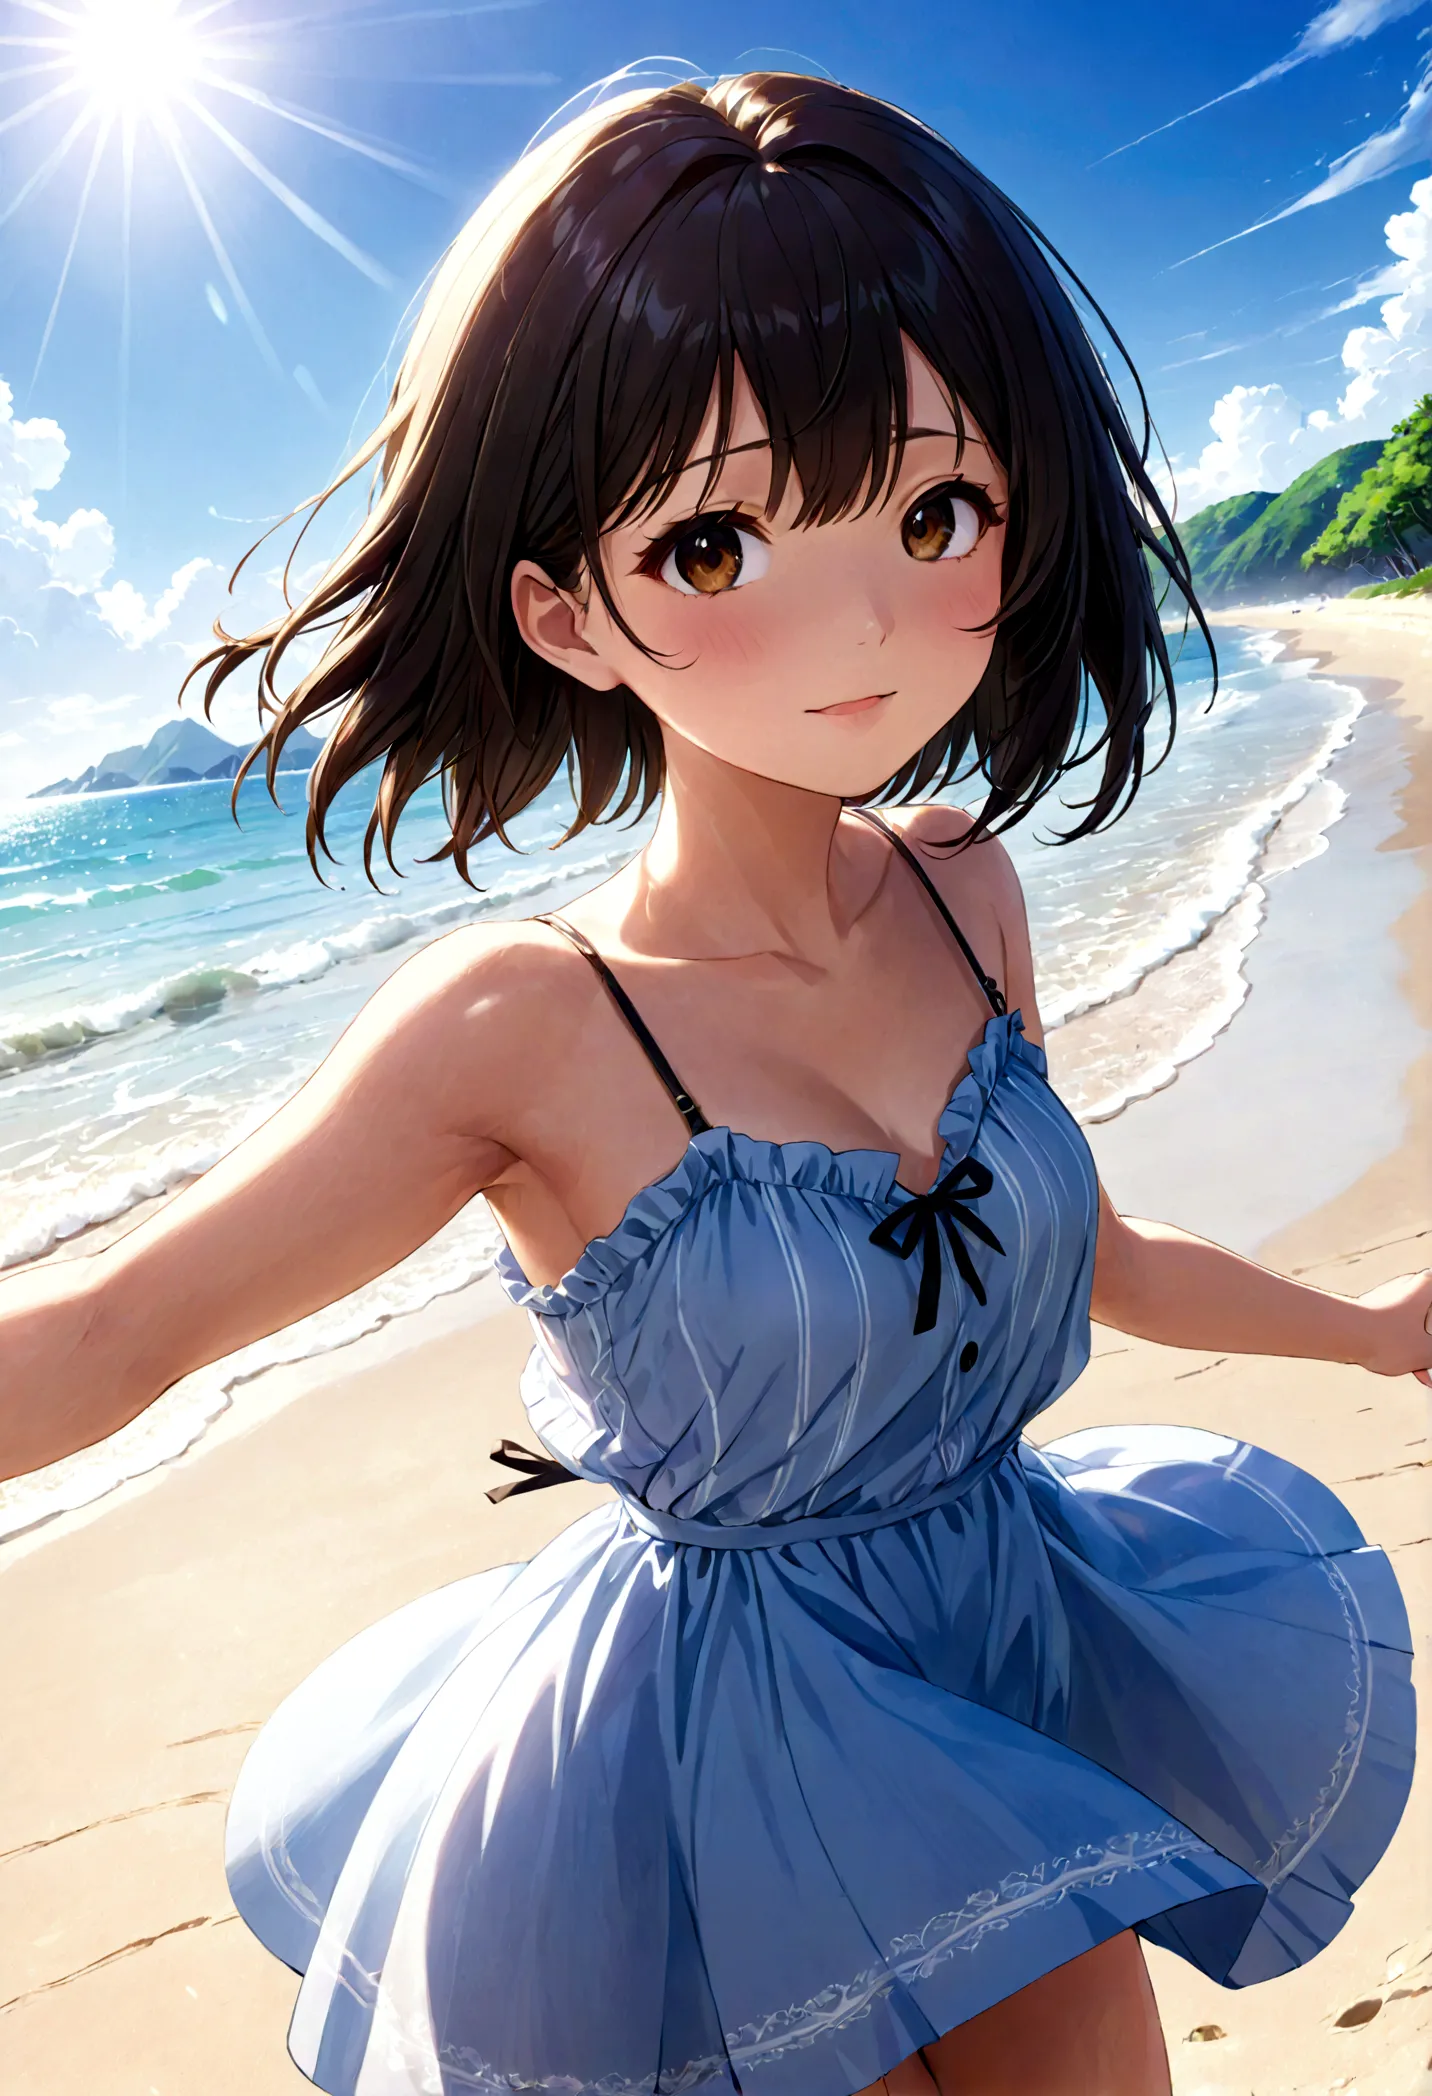 (master quality)(Anime style)(RAW Photos)High detail, Super detailed, Ultra HD Beautiful girl with short black hair having fun o...